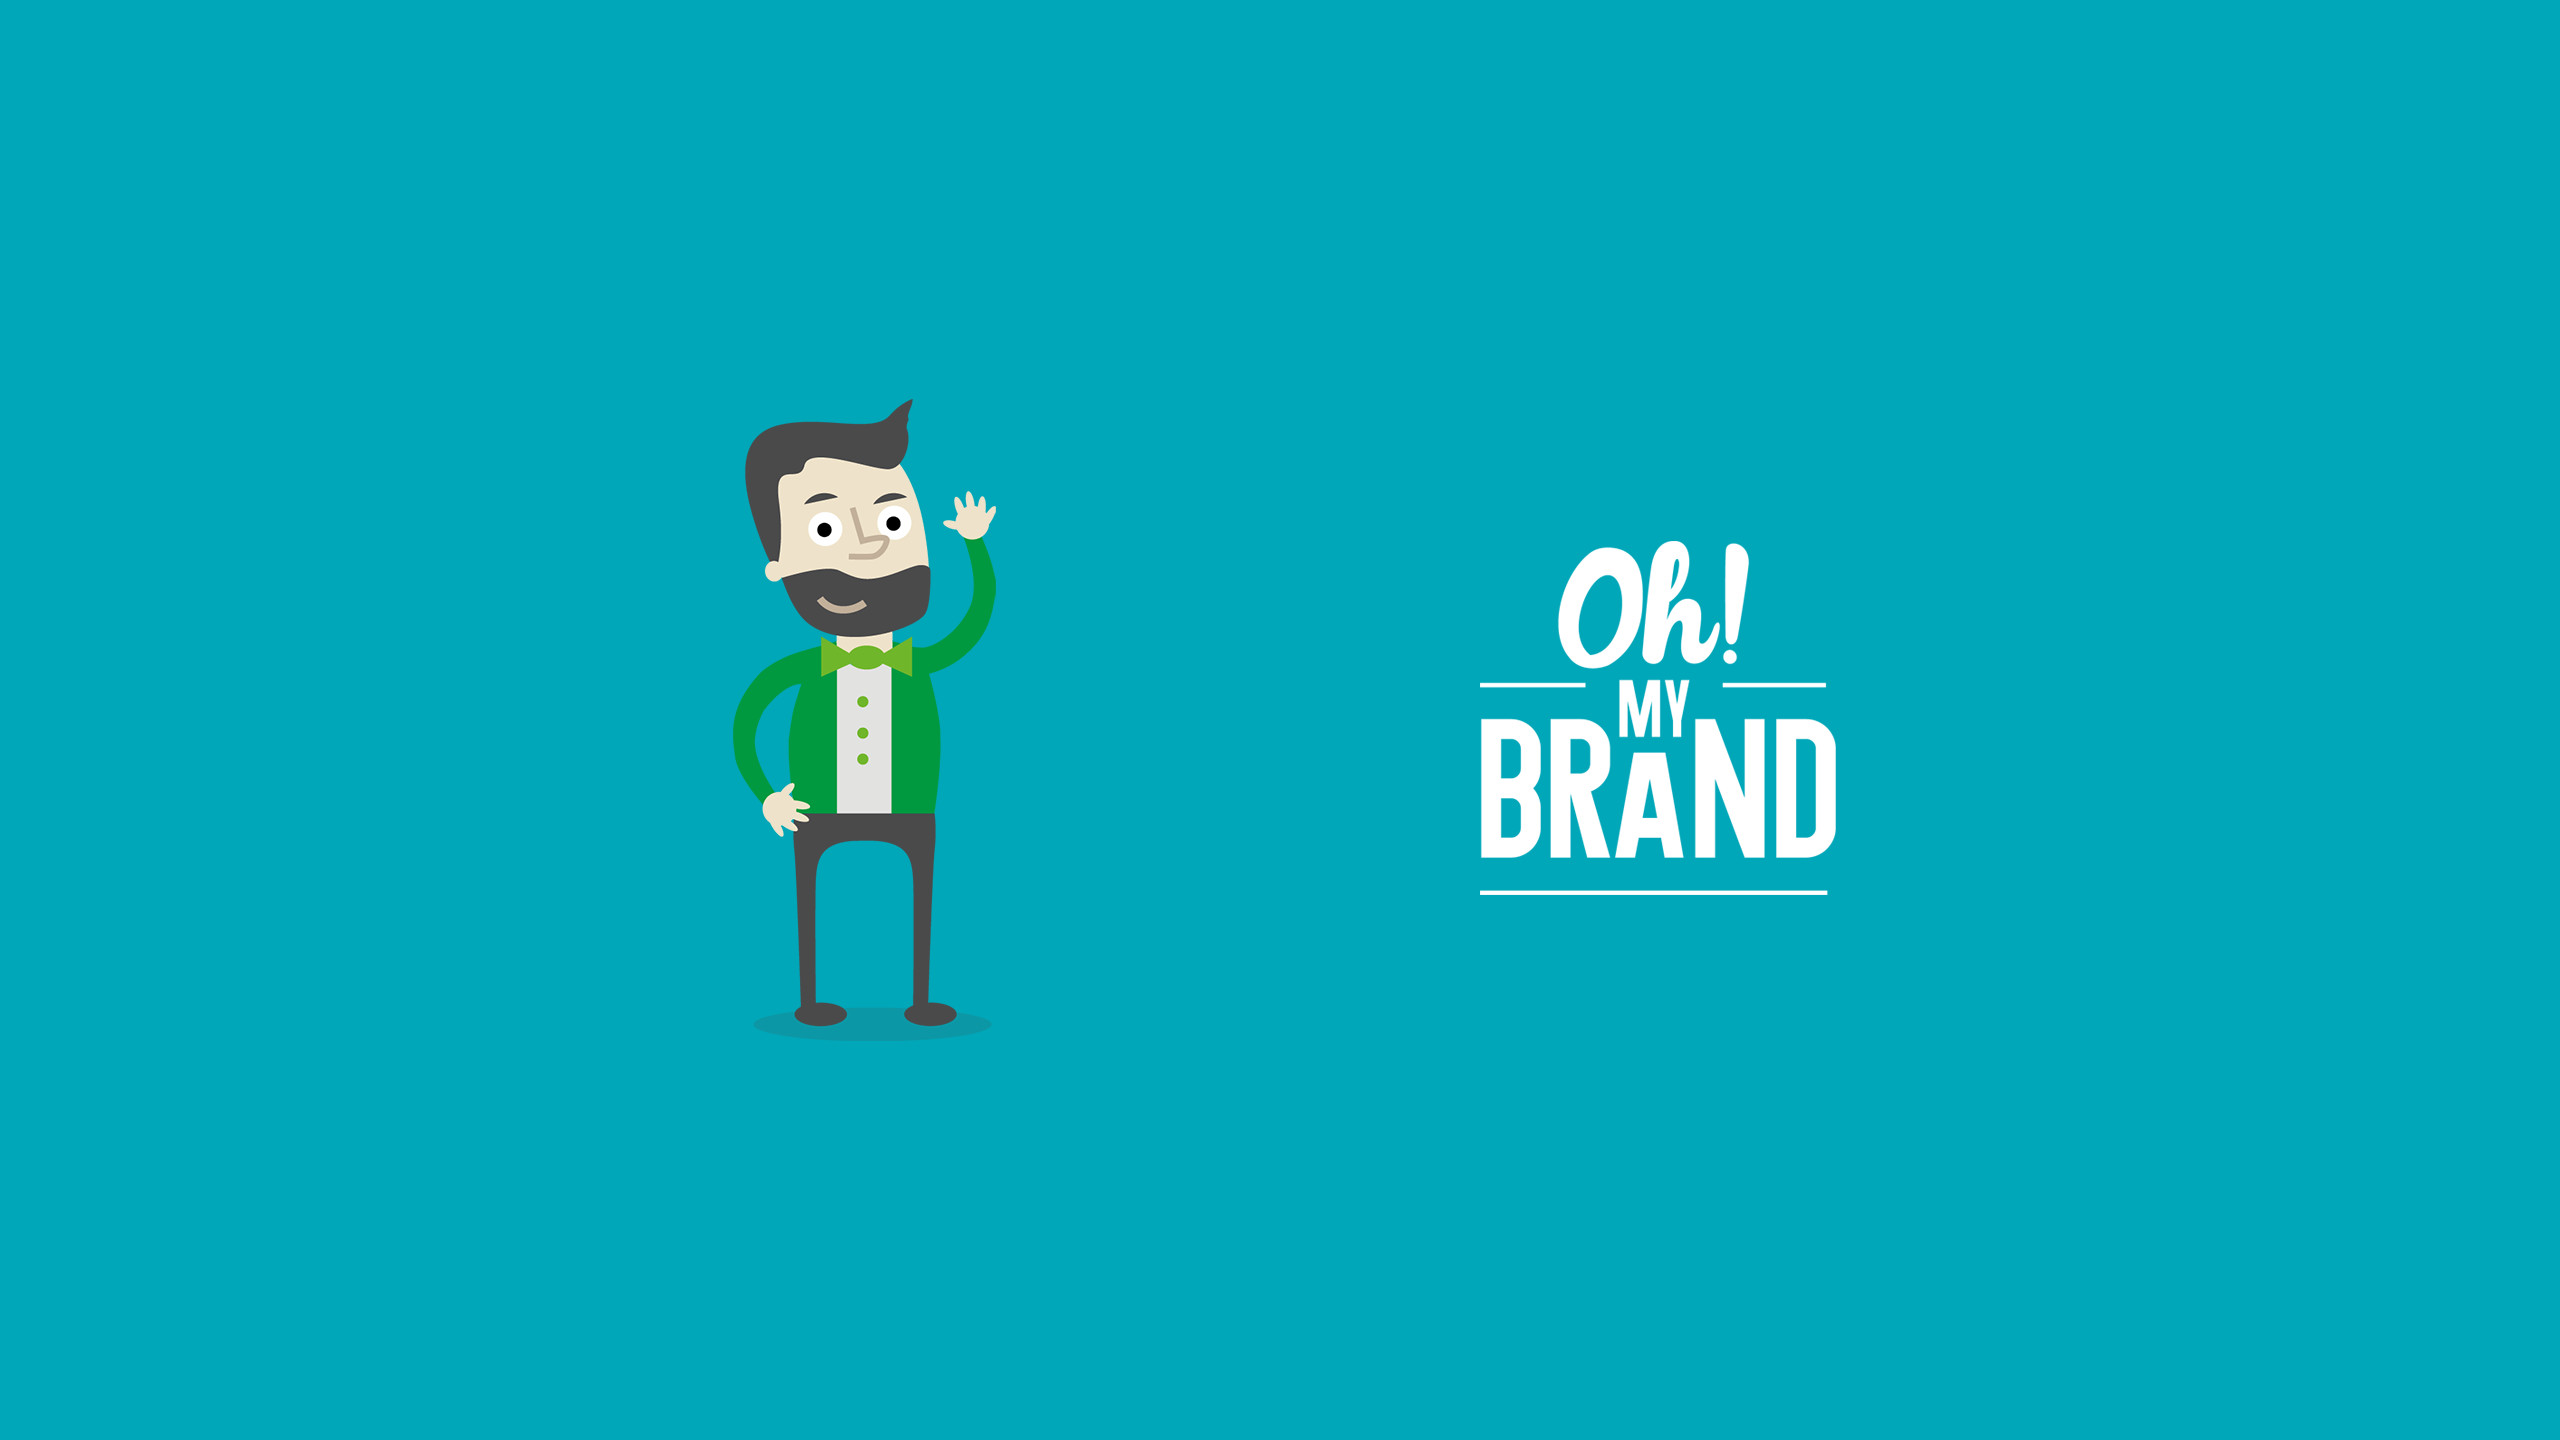 2560x1440 Backgrounds In High Quality: Brand by Darius Sabella, 05.05.14